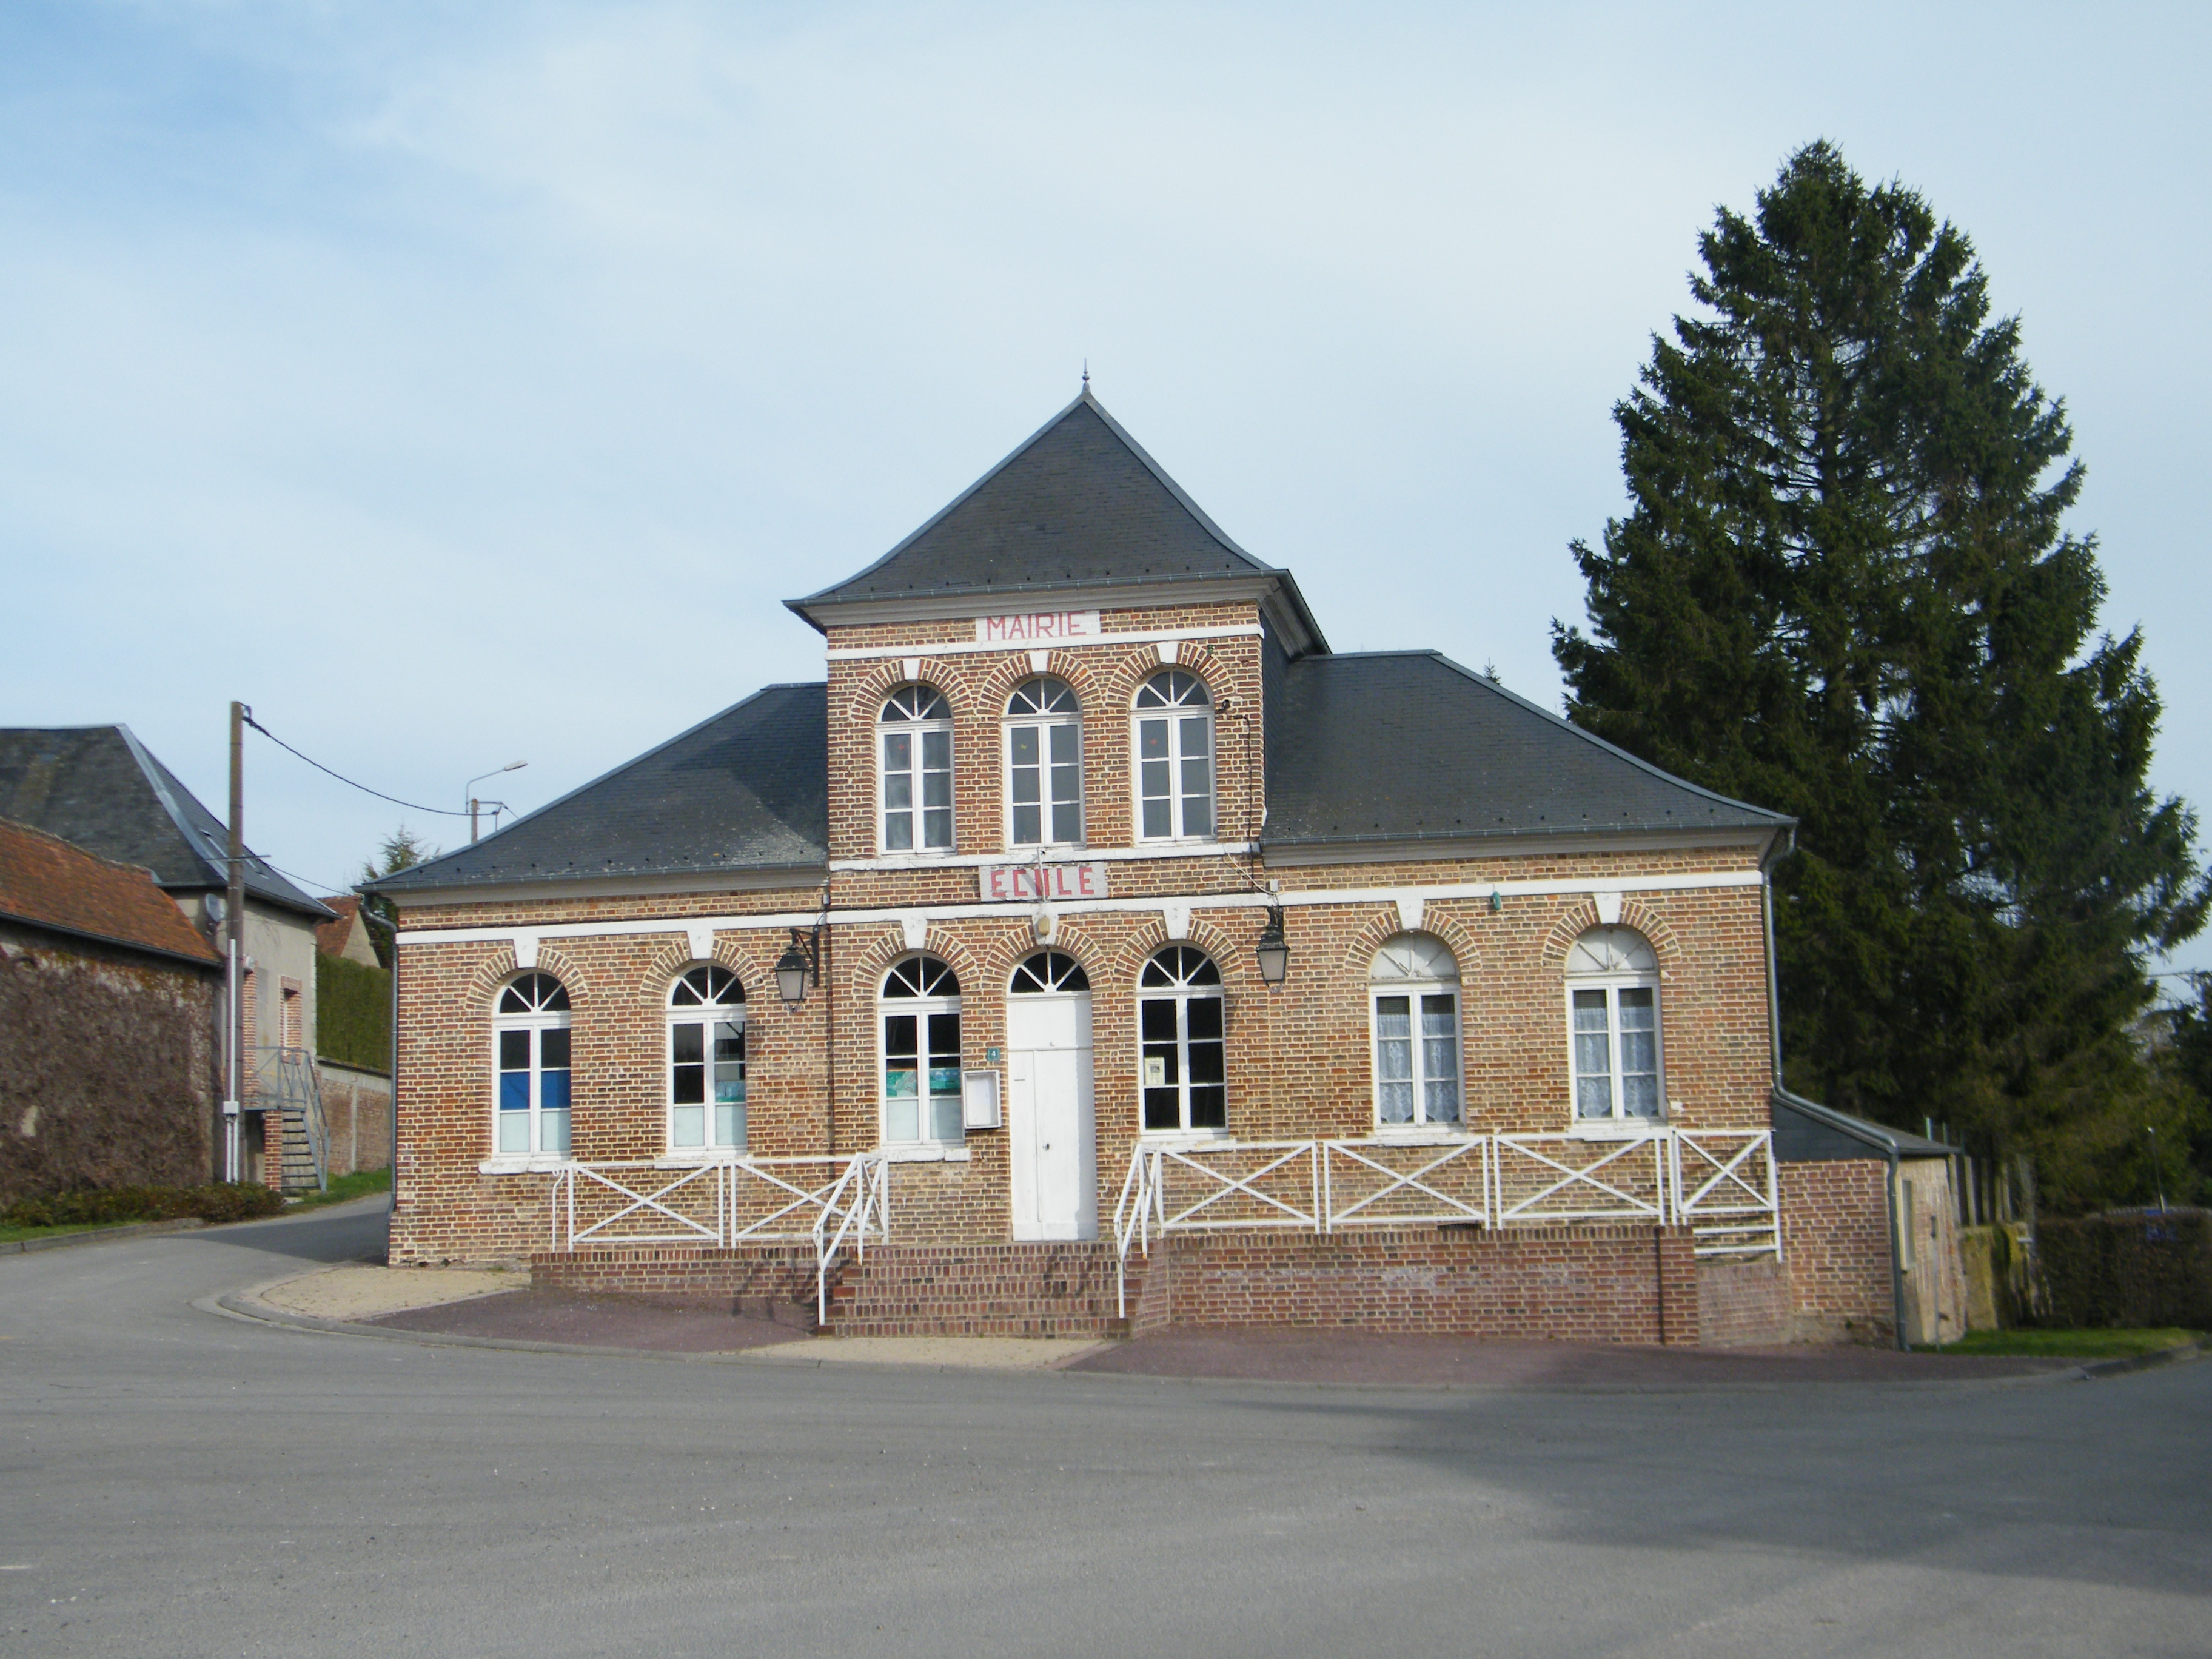 Villers-sous-Ailly